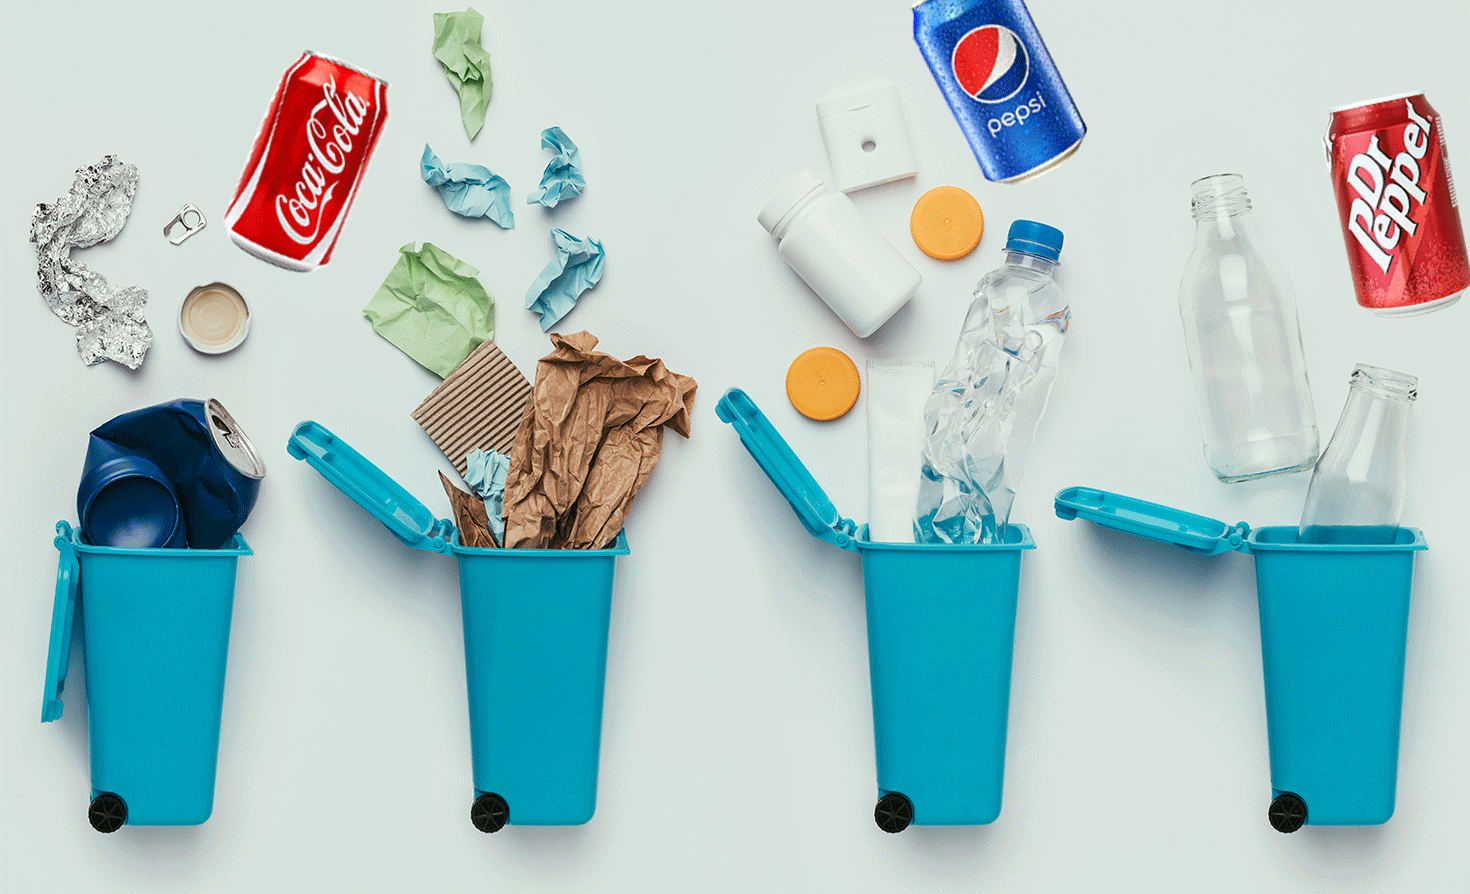 recycling items with soda bottles